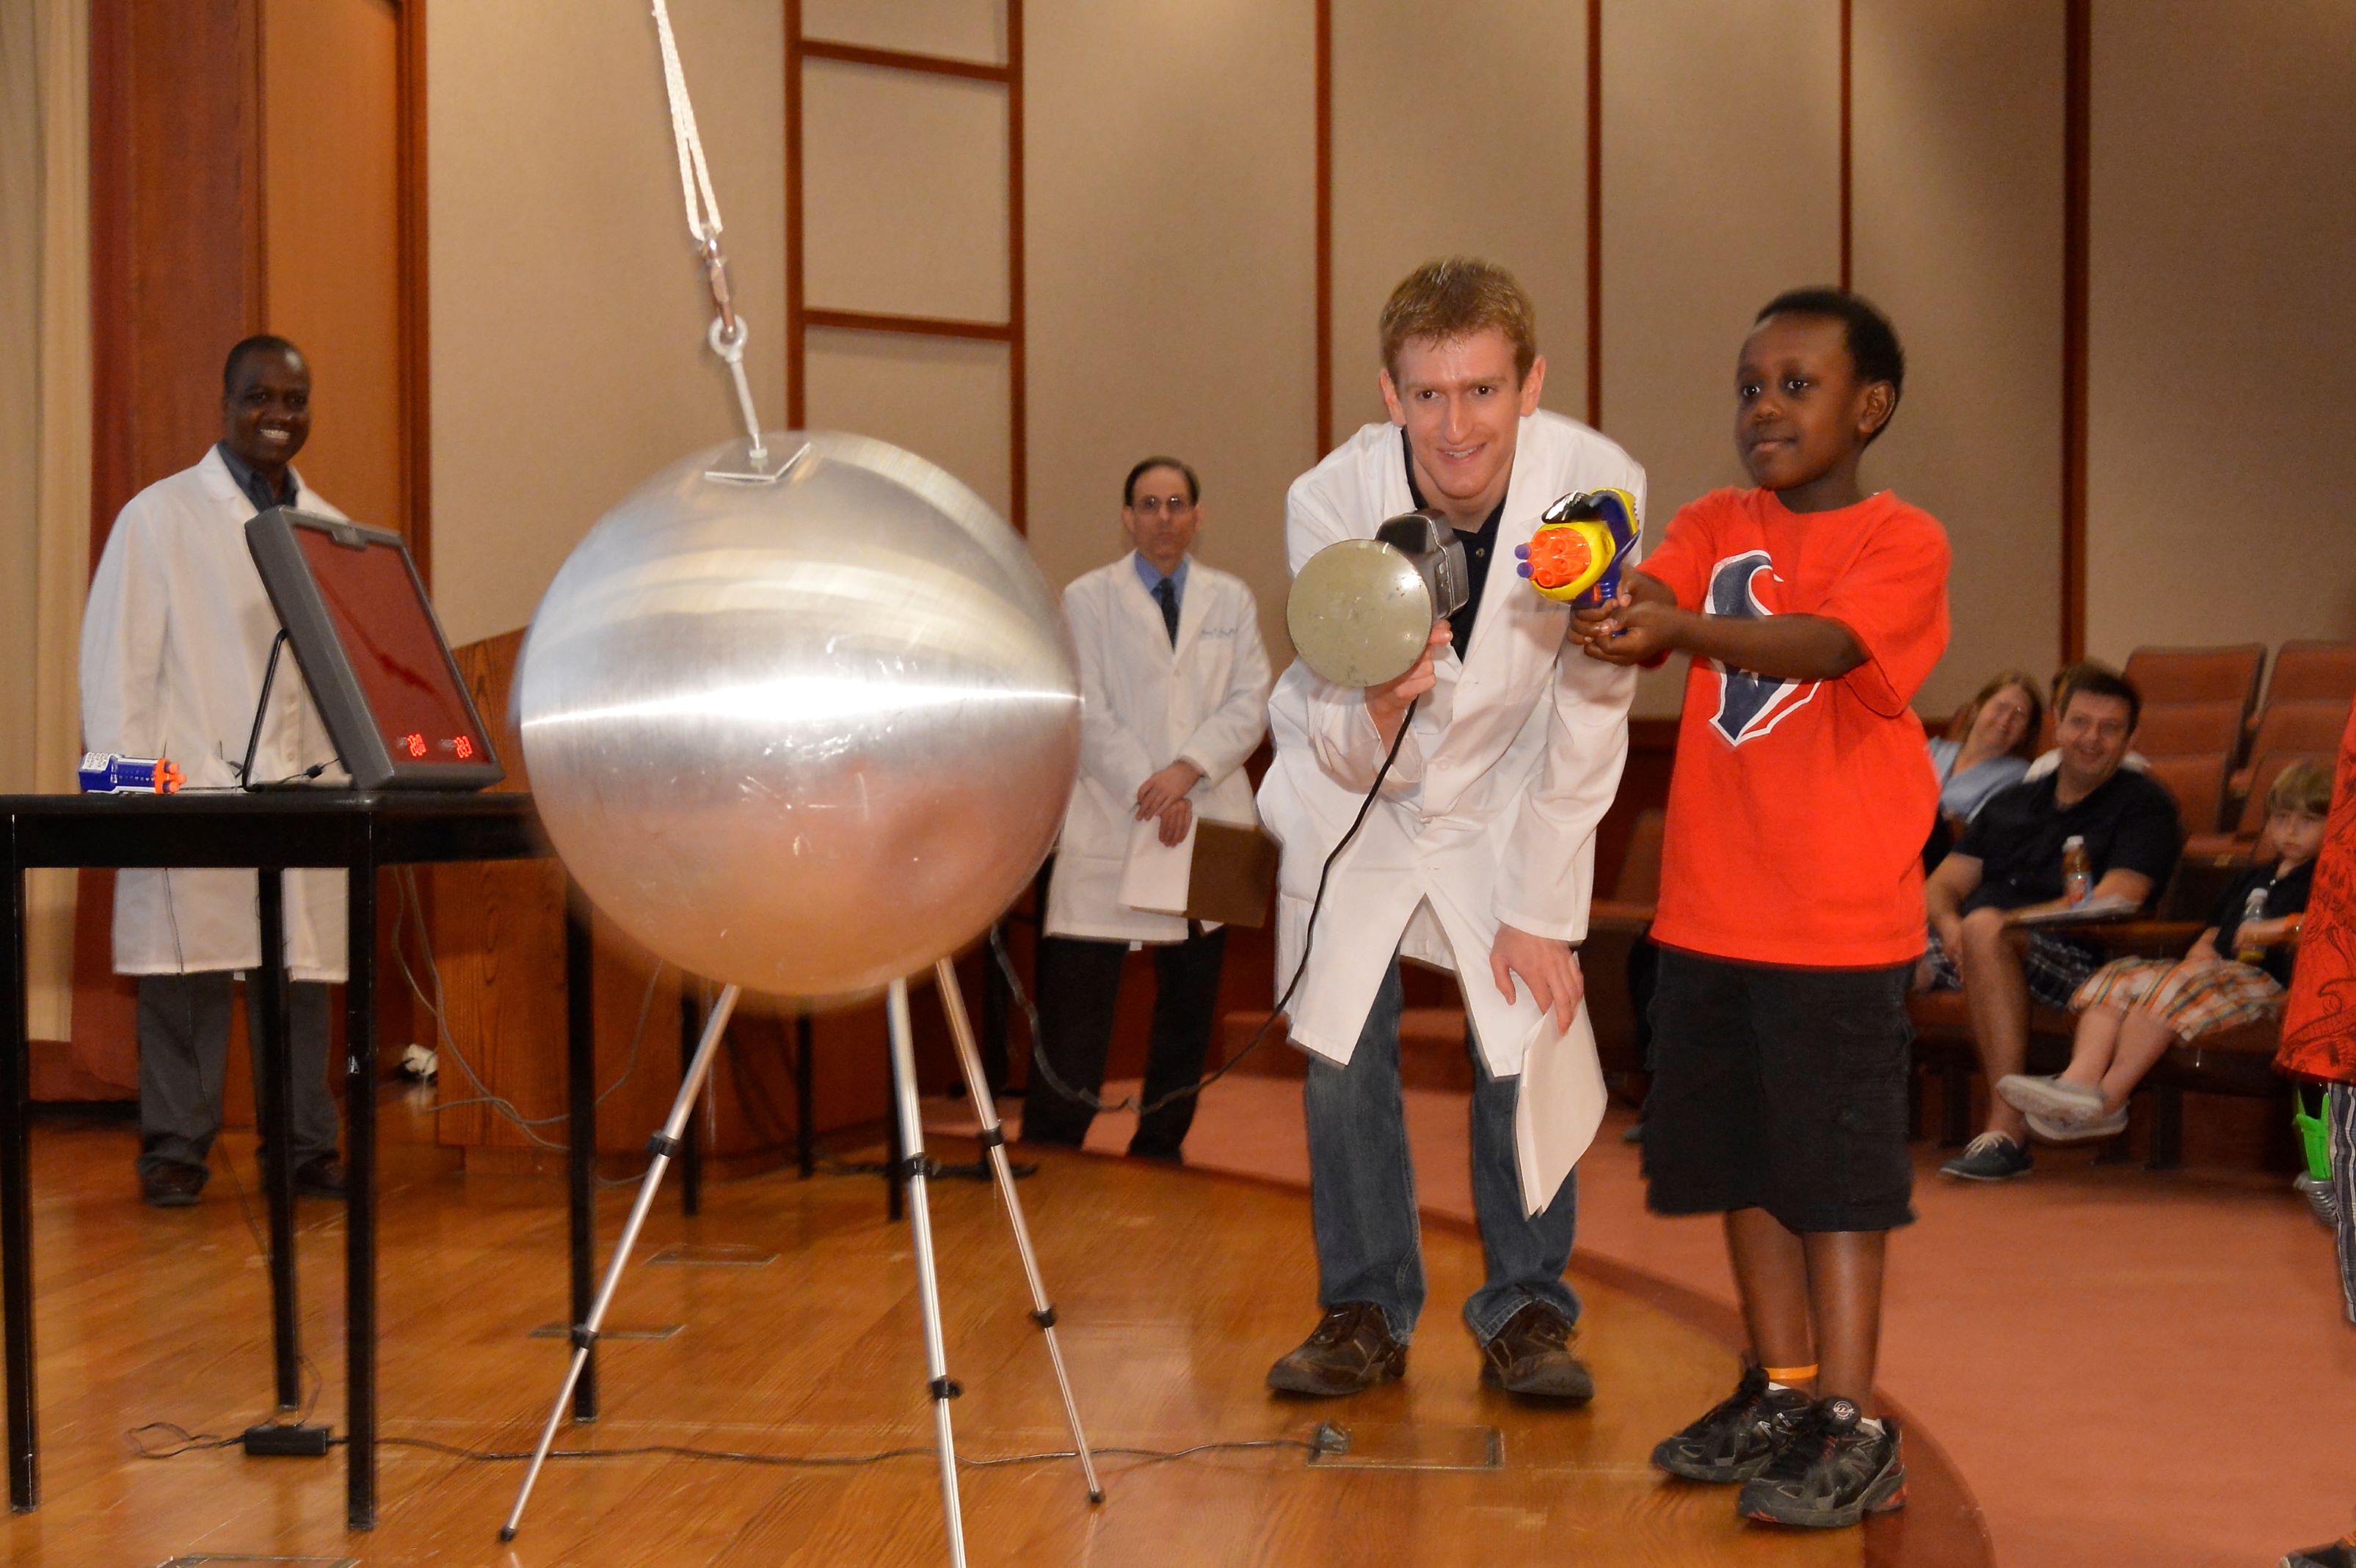 At the Science of Radar show, a child shoots Nerf bullets at a swinging pendulum while a scientist measures the speed of each.